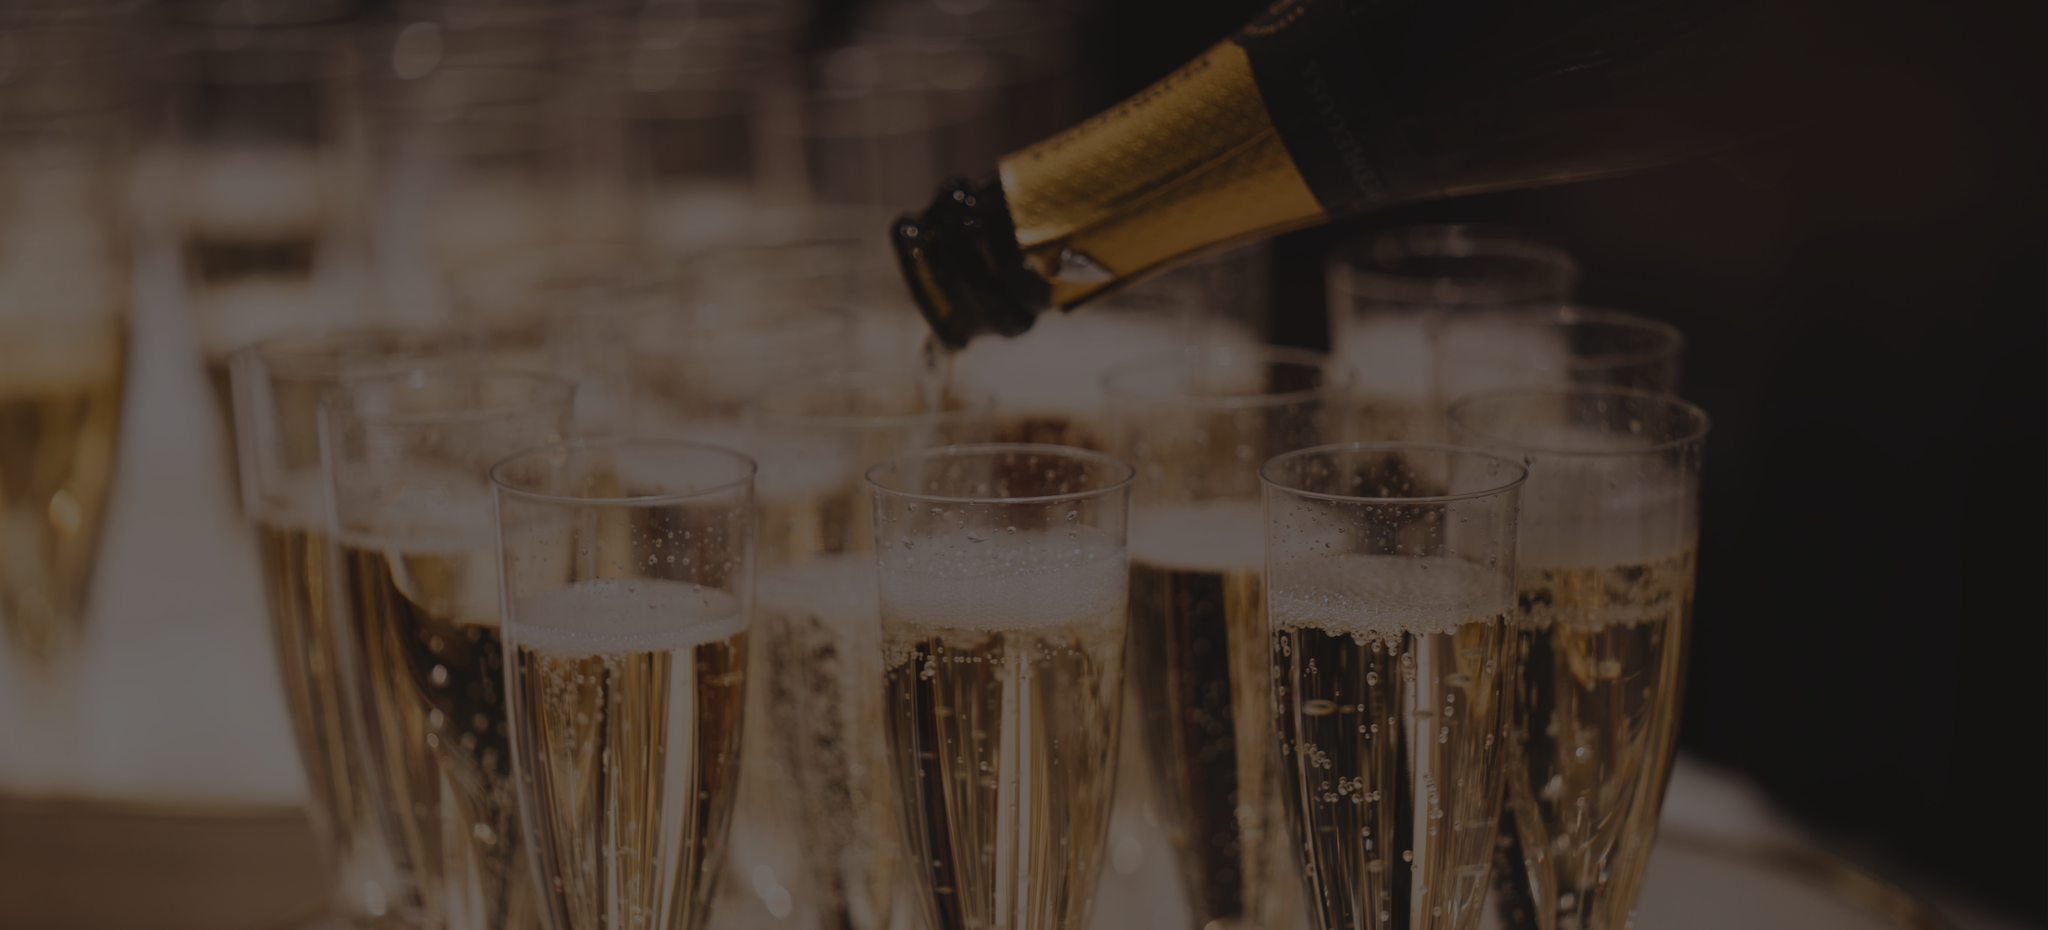 New Year’s Cheer-Worthy Bubblies – Grower Champagnes